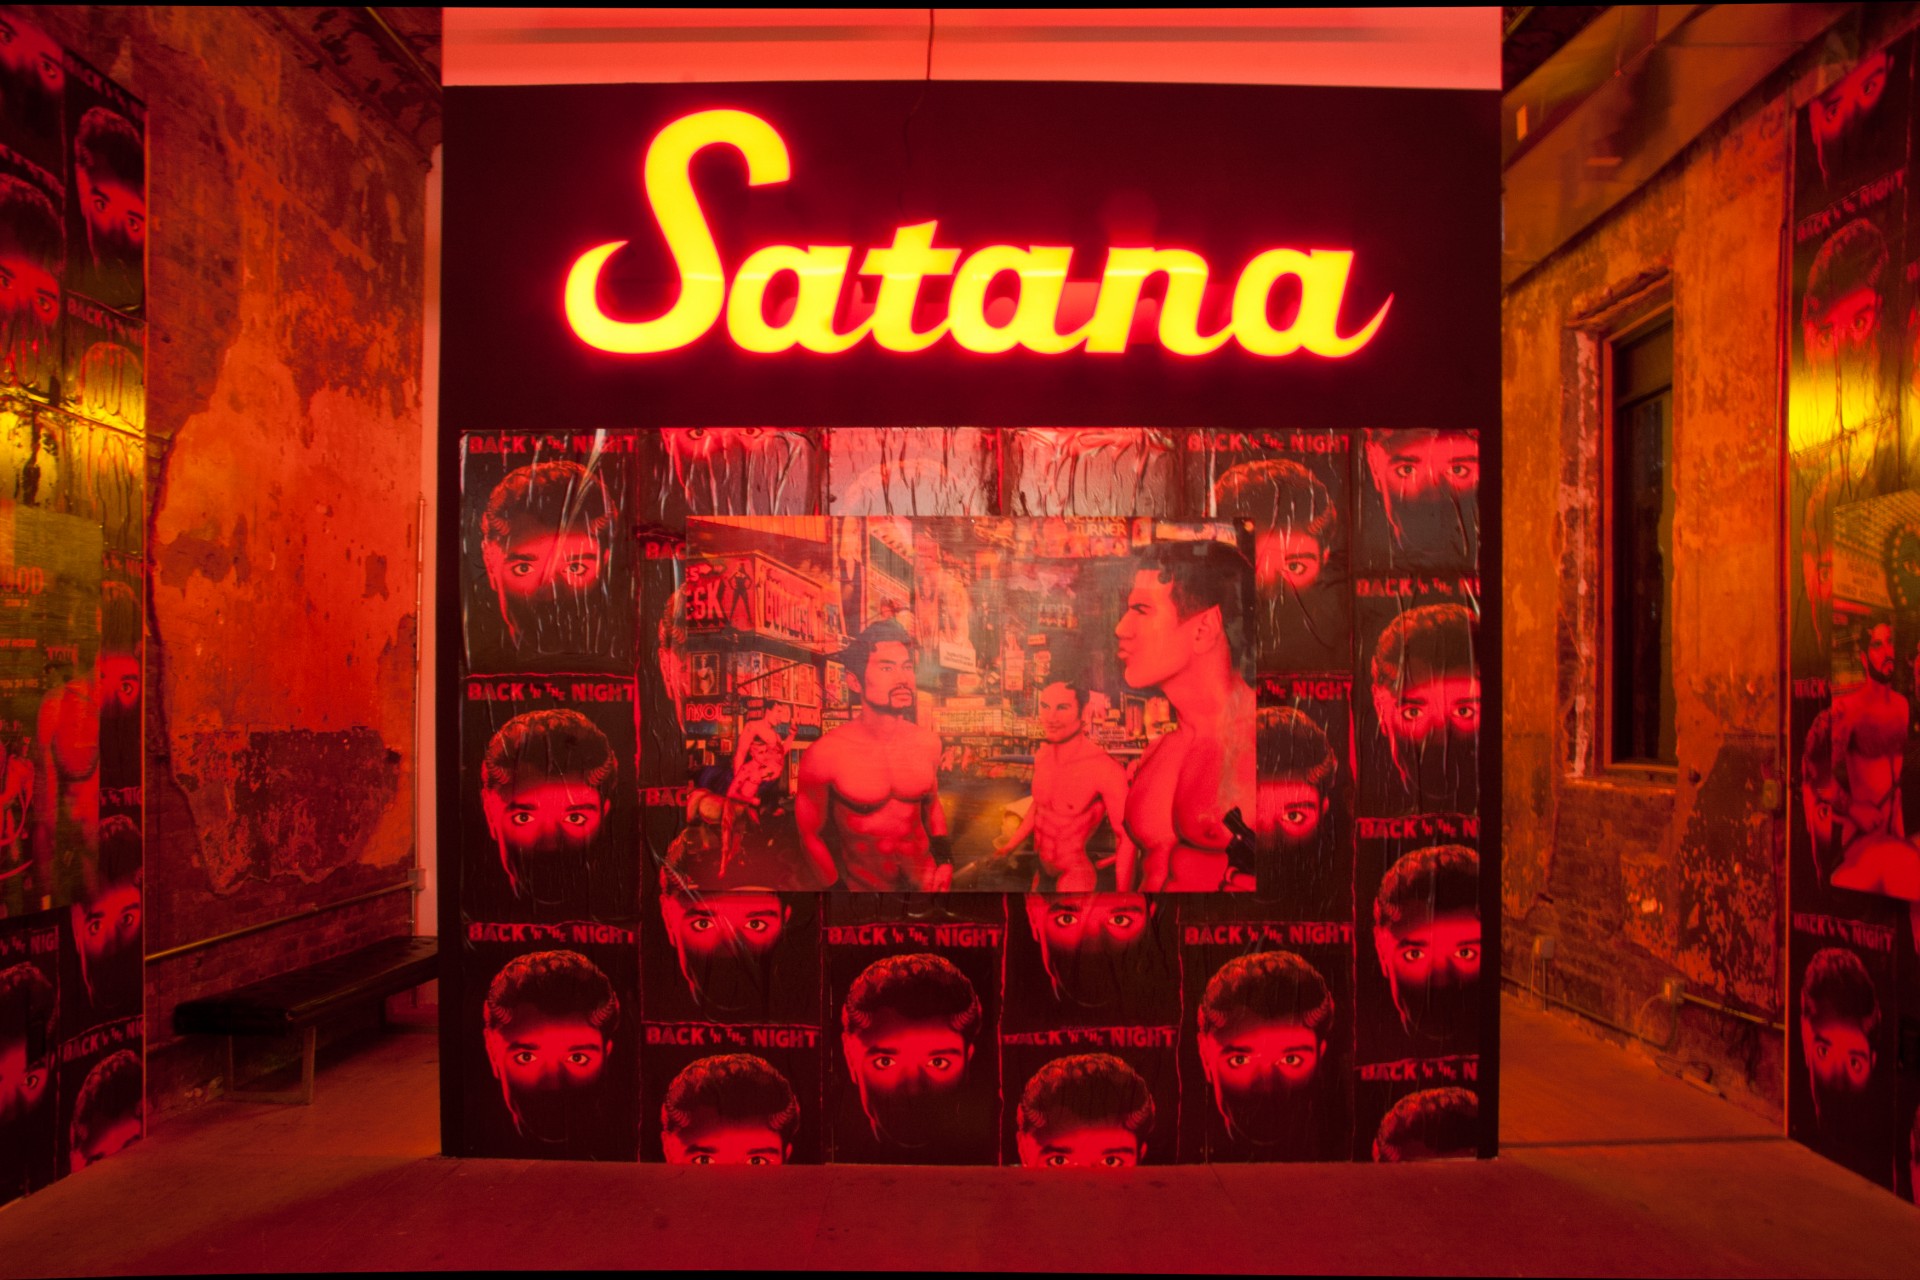 Scott Ewalt, *BACK IN THE NIGHT: Psychotronic Landscapes, Objects & Souvenirs*. Installation view